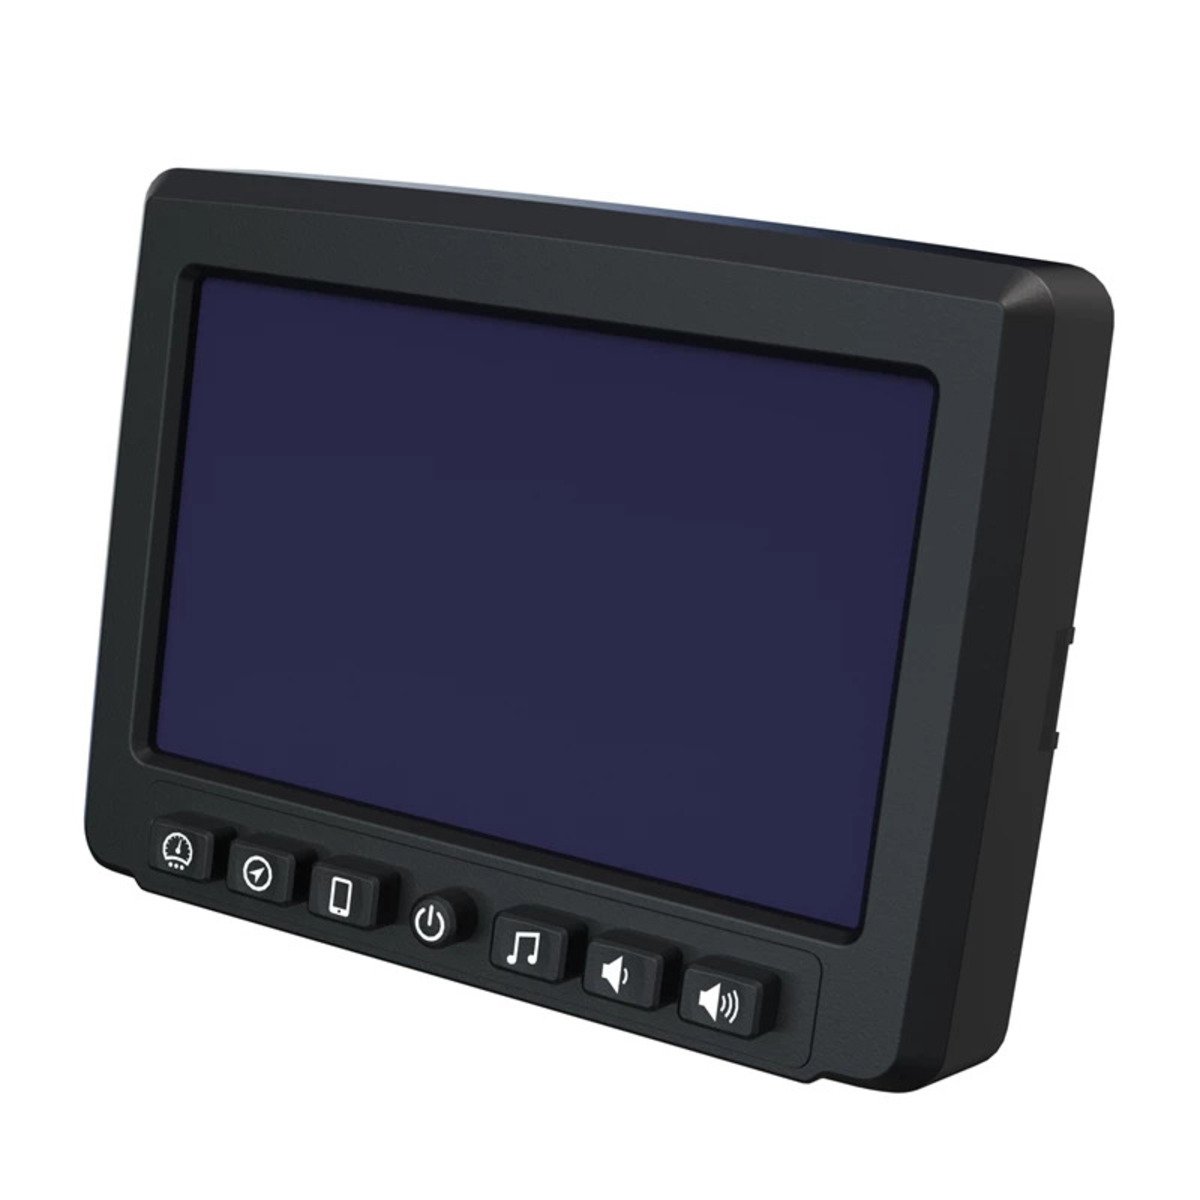 Polaris 7” Display Powered by Ride Command